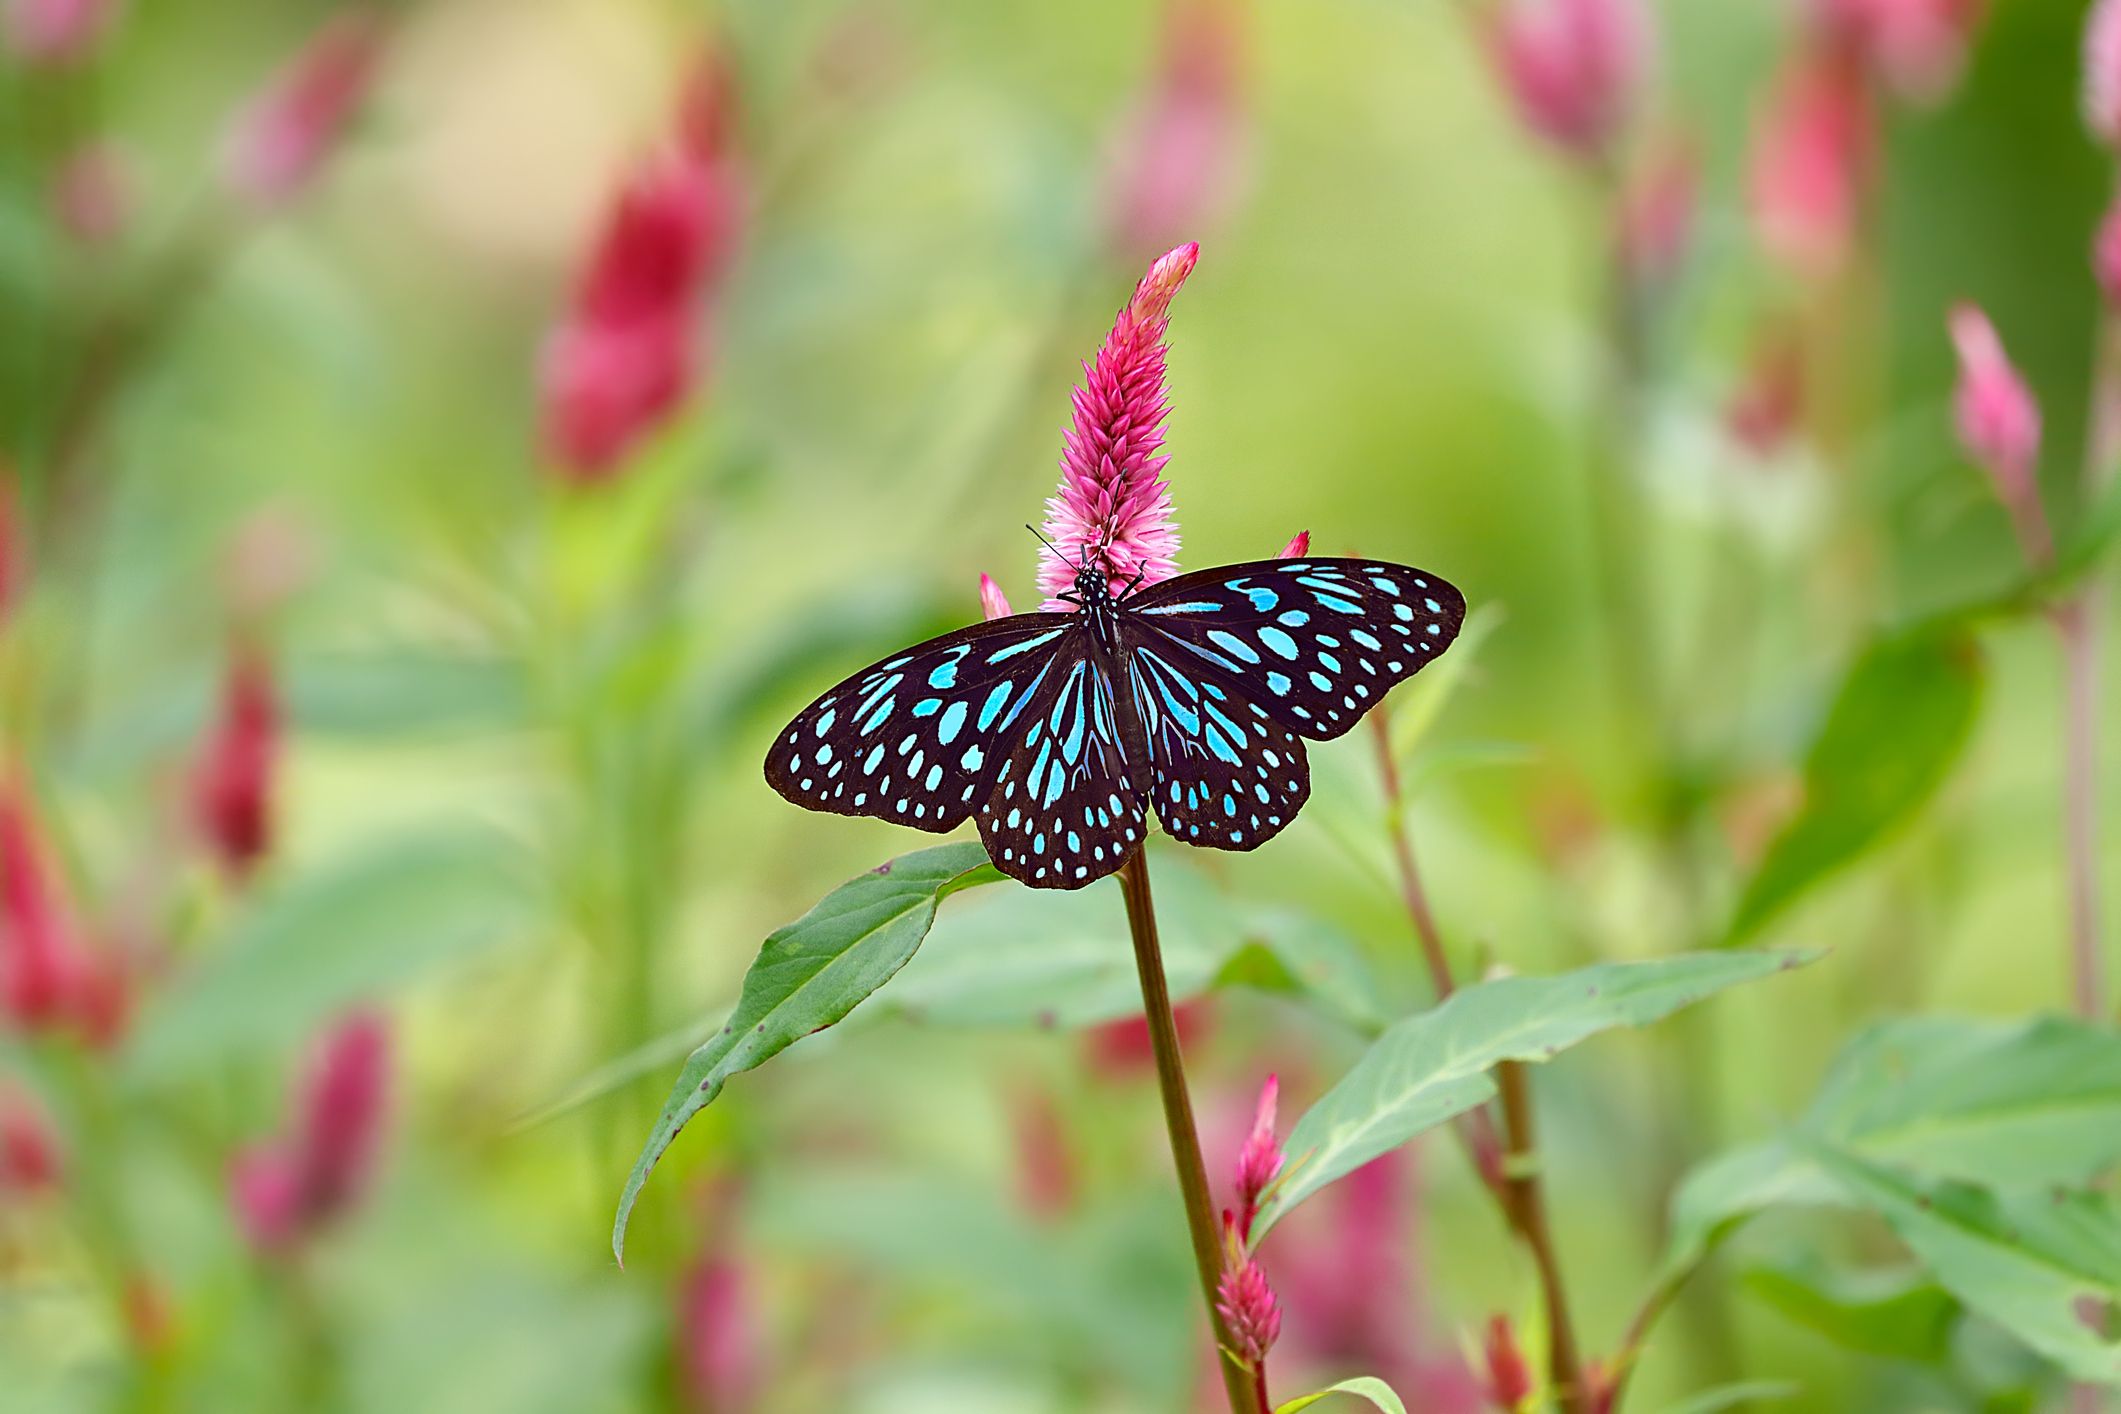 A blue butterfly perched on a plant.